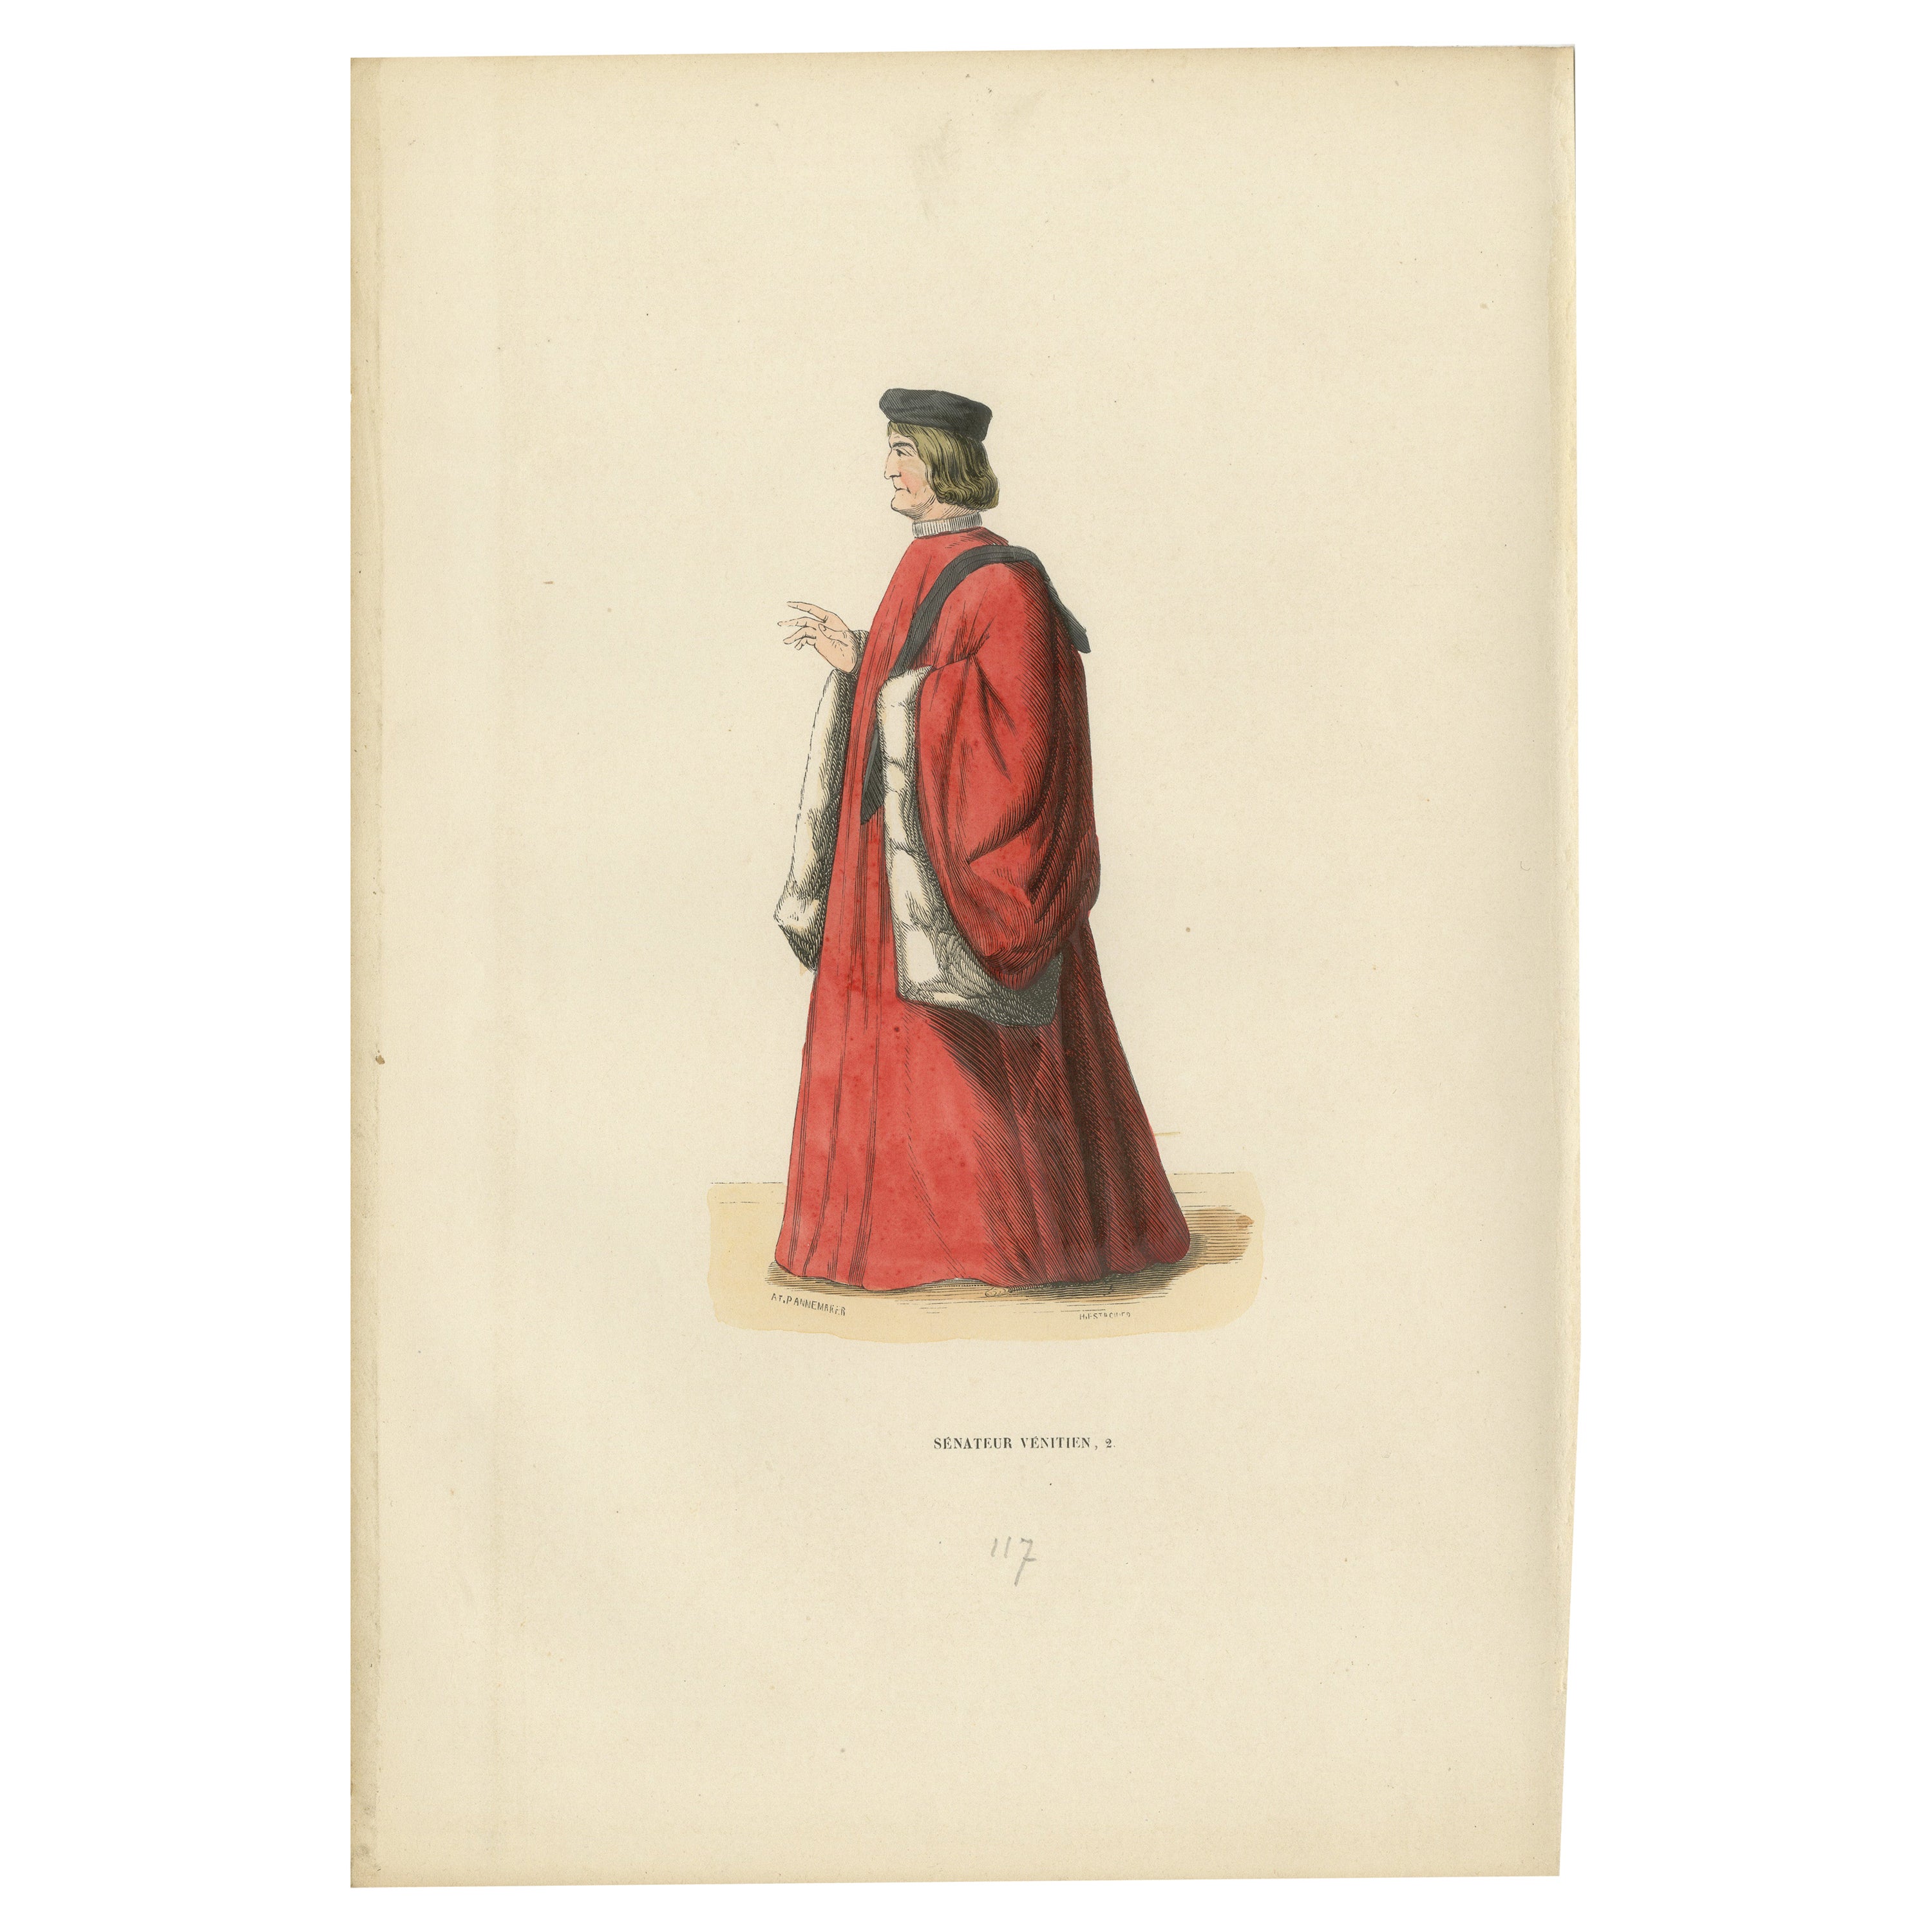 Eminent Venetian Senator in Traditional Robes: A Portrayal of Political Prestige For Sale